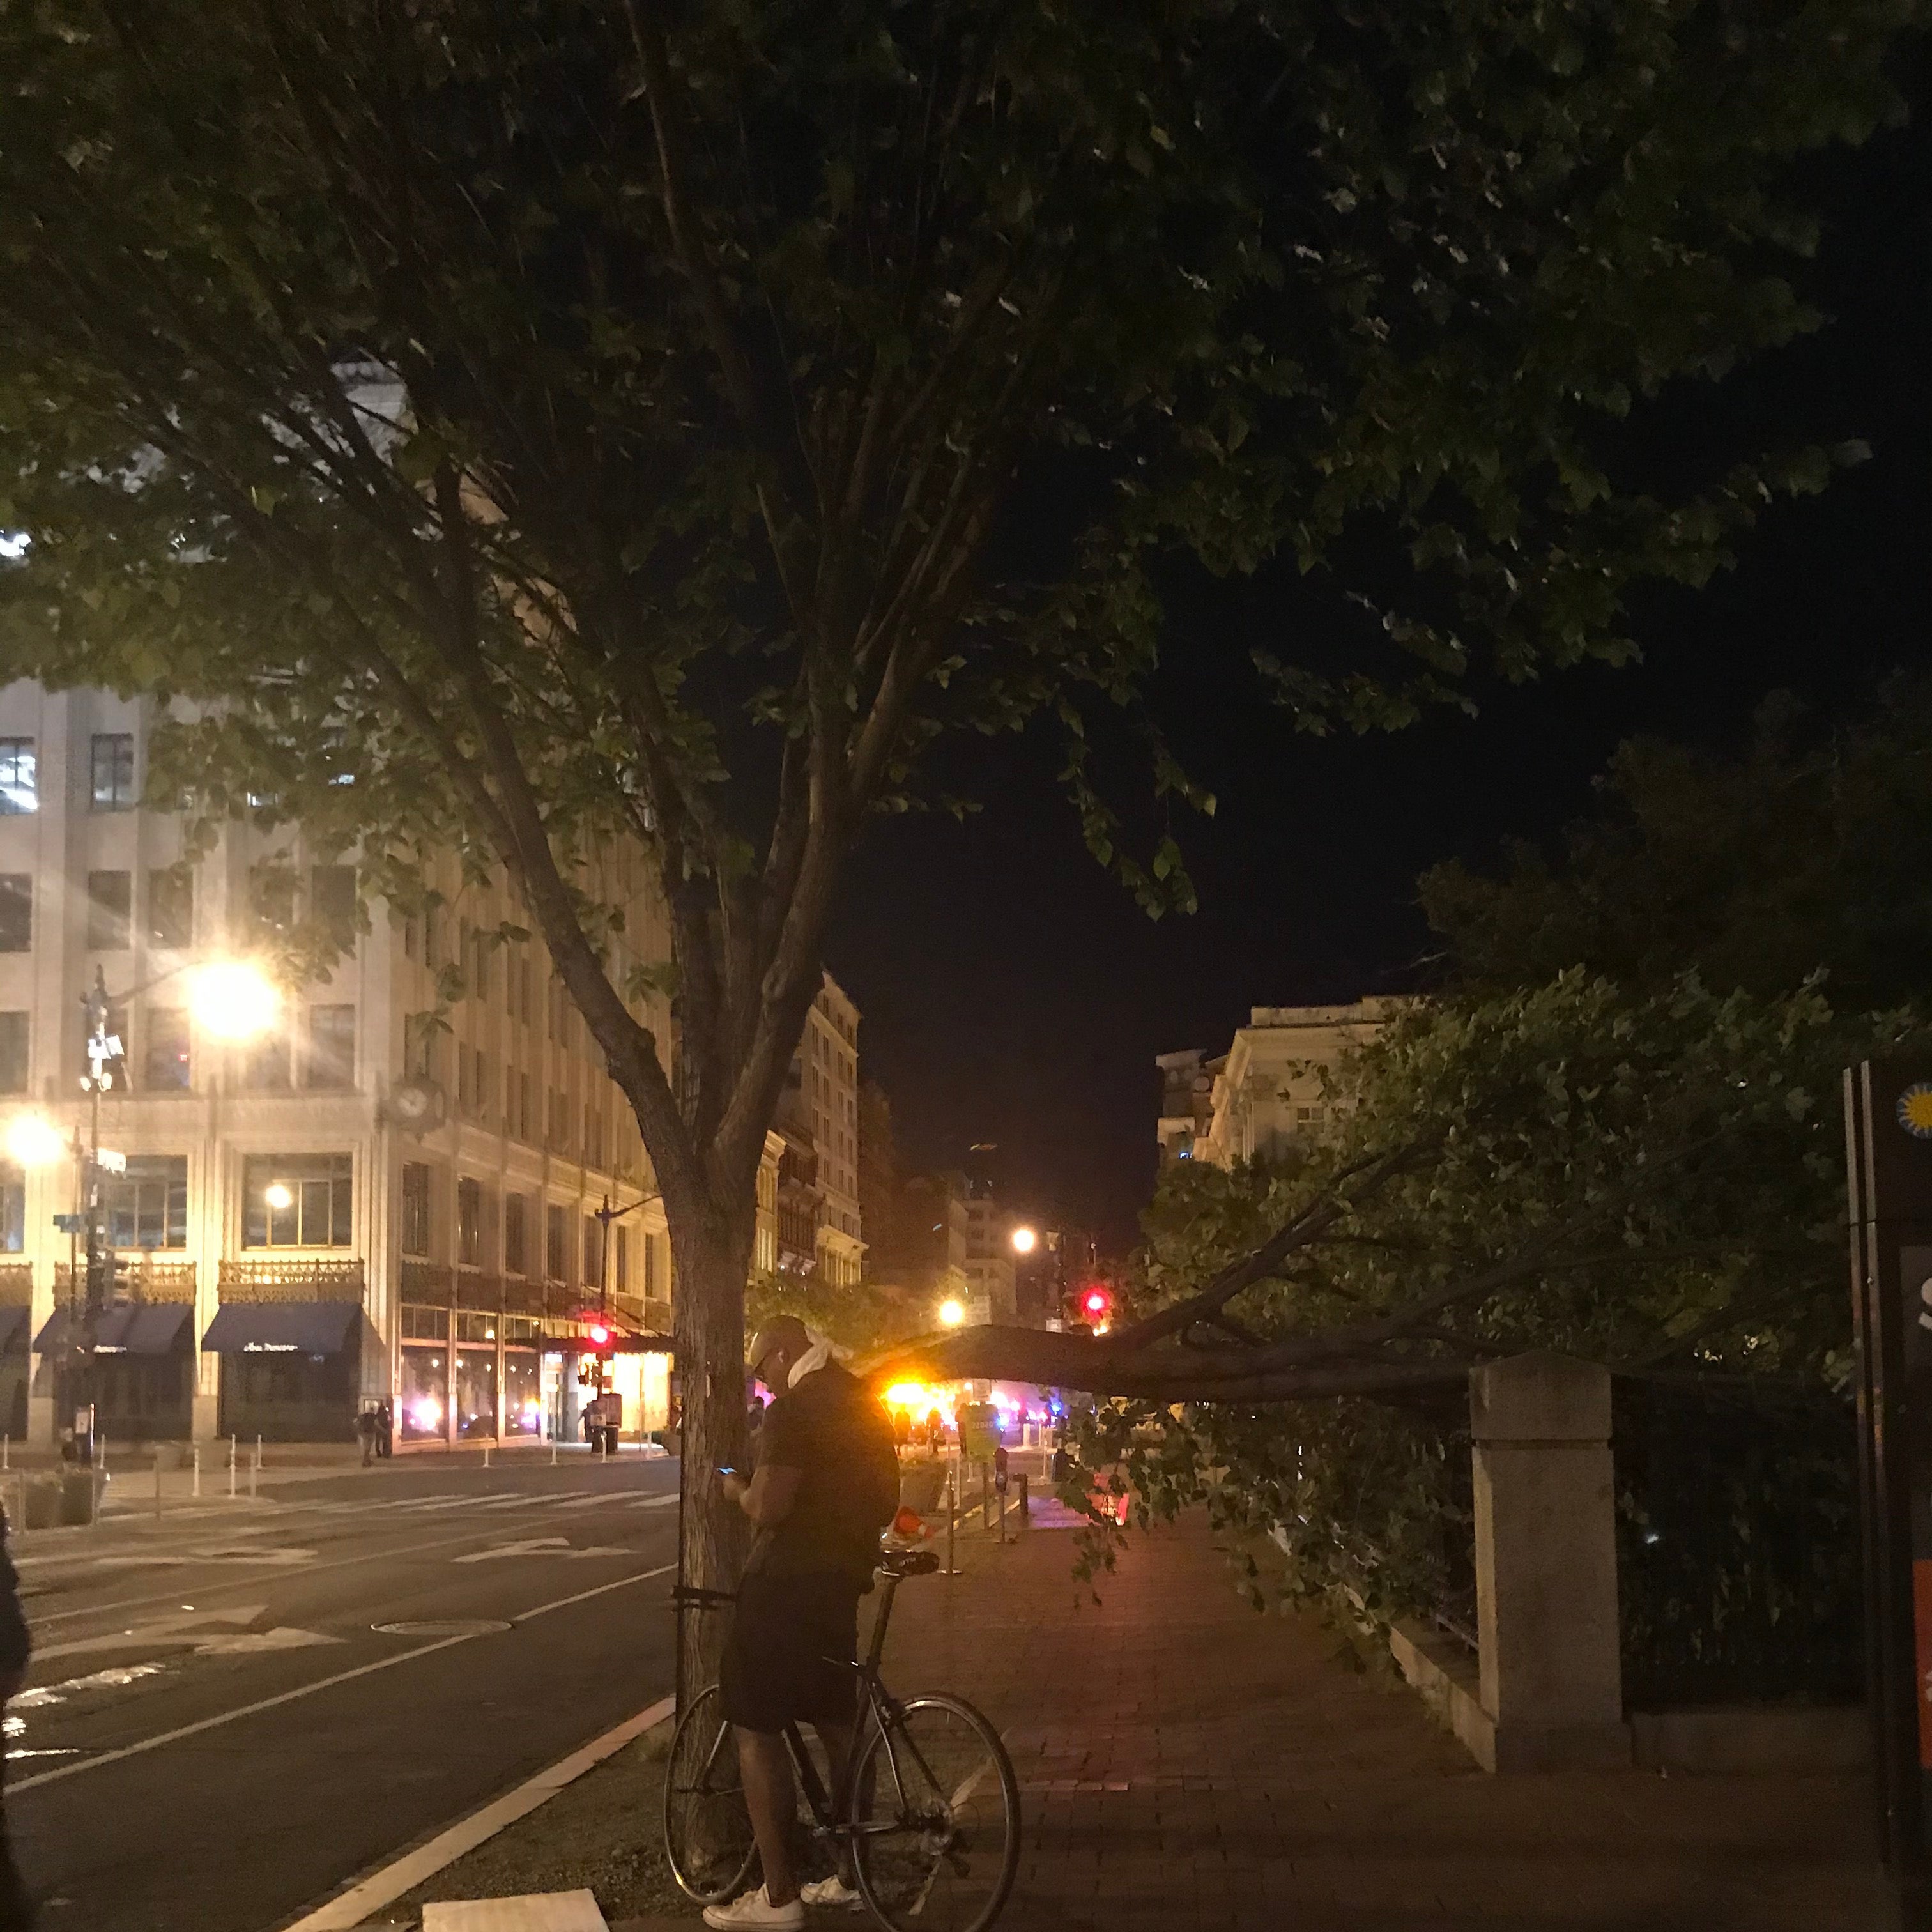 A man stands beside his bike in front of a tree in downtown D.C. A snapped limb dangles from the tree.